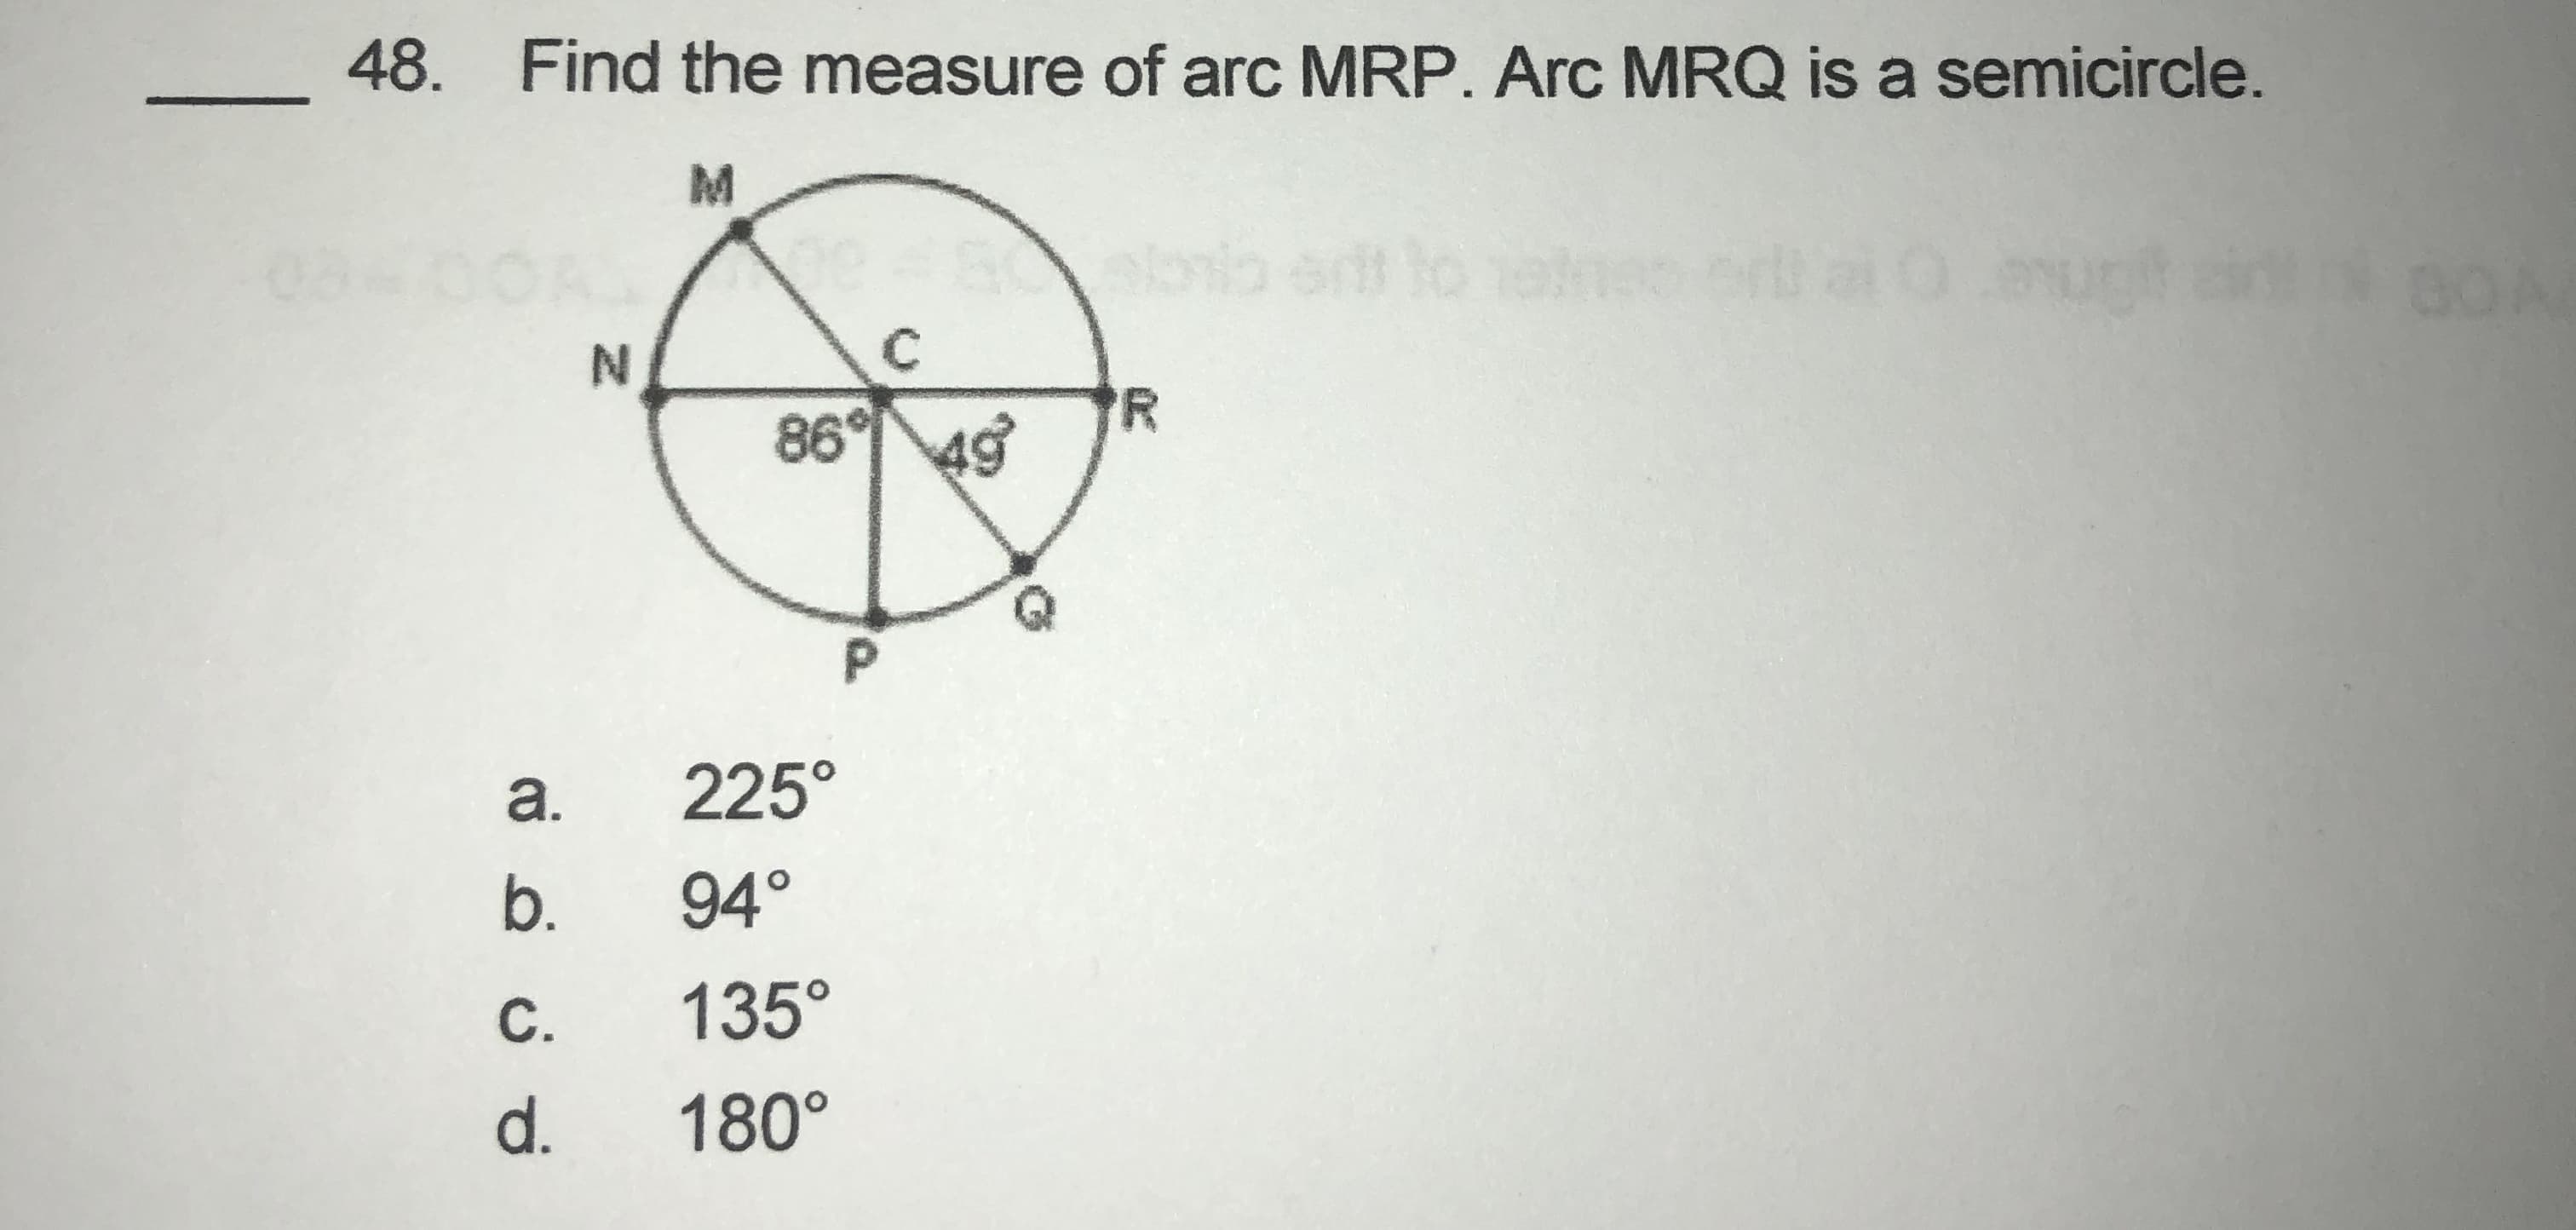 Find the measure of arc MRP. Arc MRQ is a semicircle.
to
'R
86° 49
a.
225°
b.
94°
C.
135°
d.
180°
